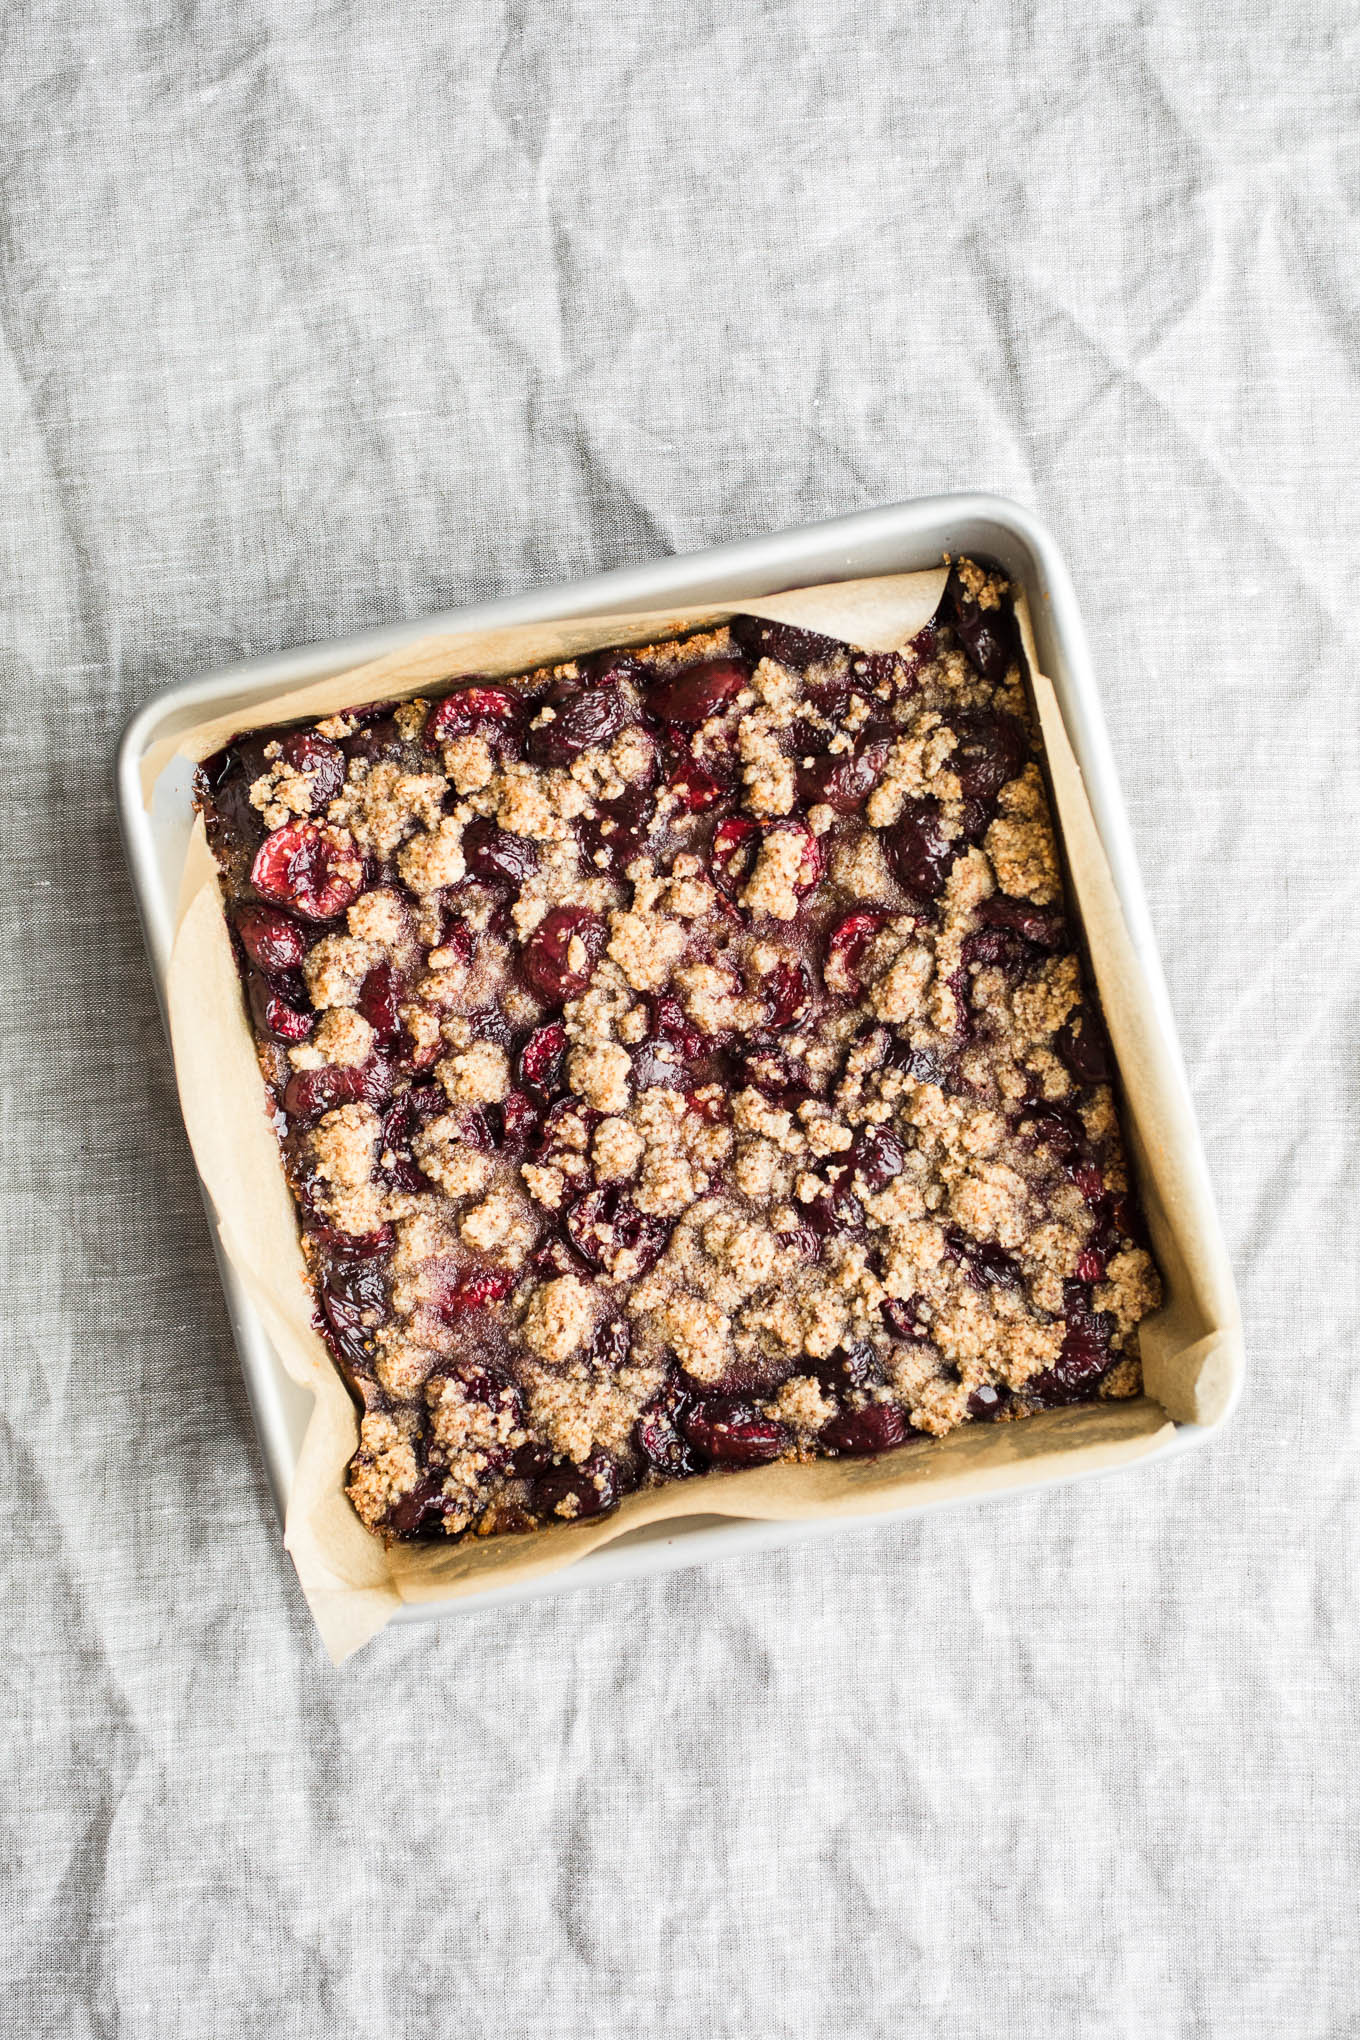 Gluten-Free Cherry Crumble Bars that use fresh cherries, wholesome almond flour, and unrefined coconut sugar. Part cherry pie, part coffee cake, all good! Vegan too. 